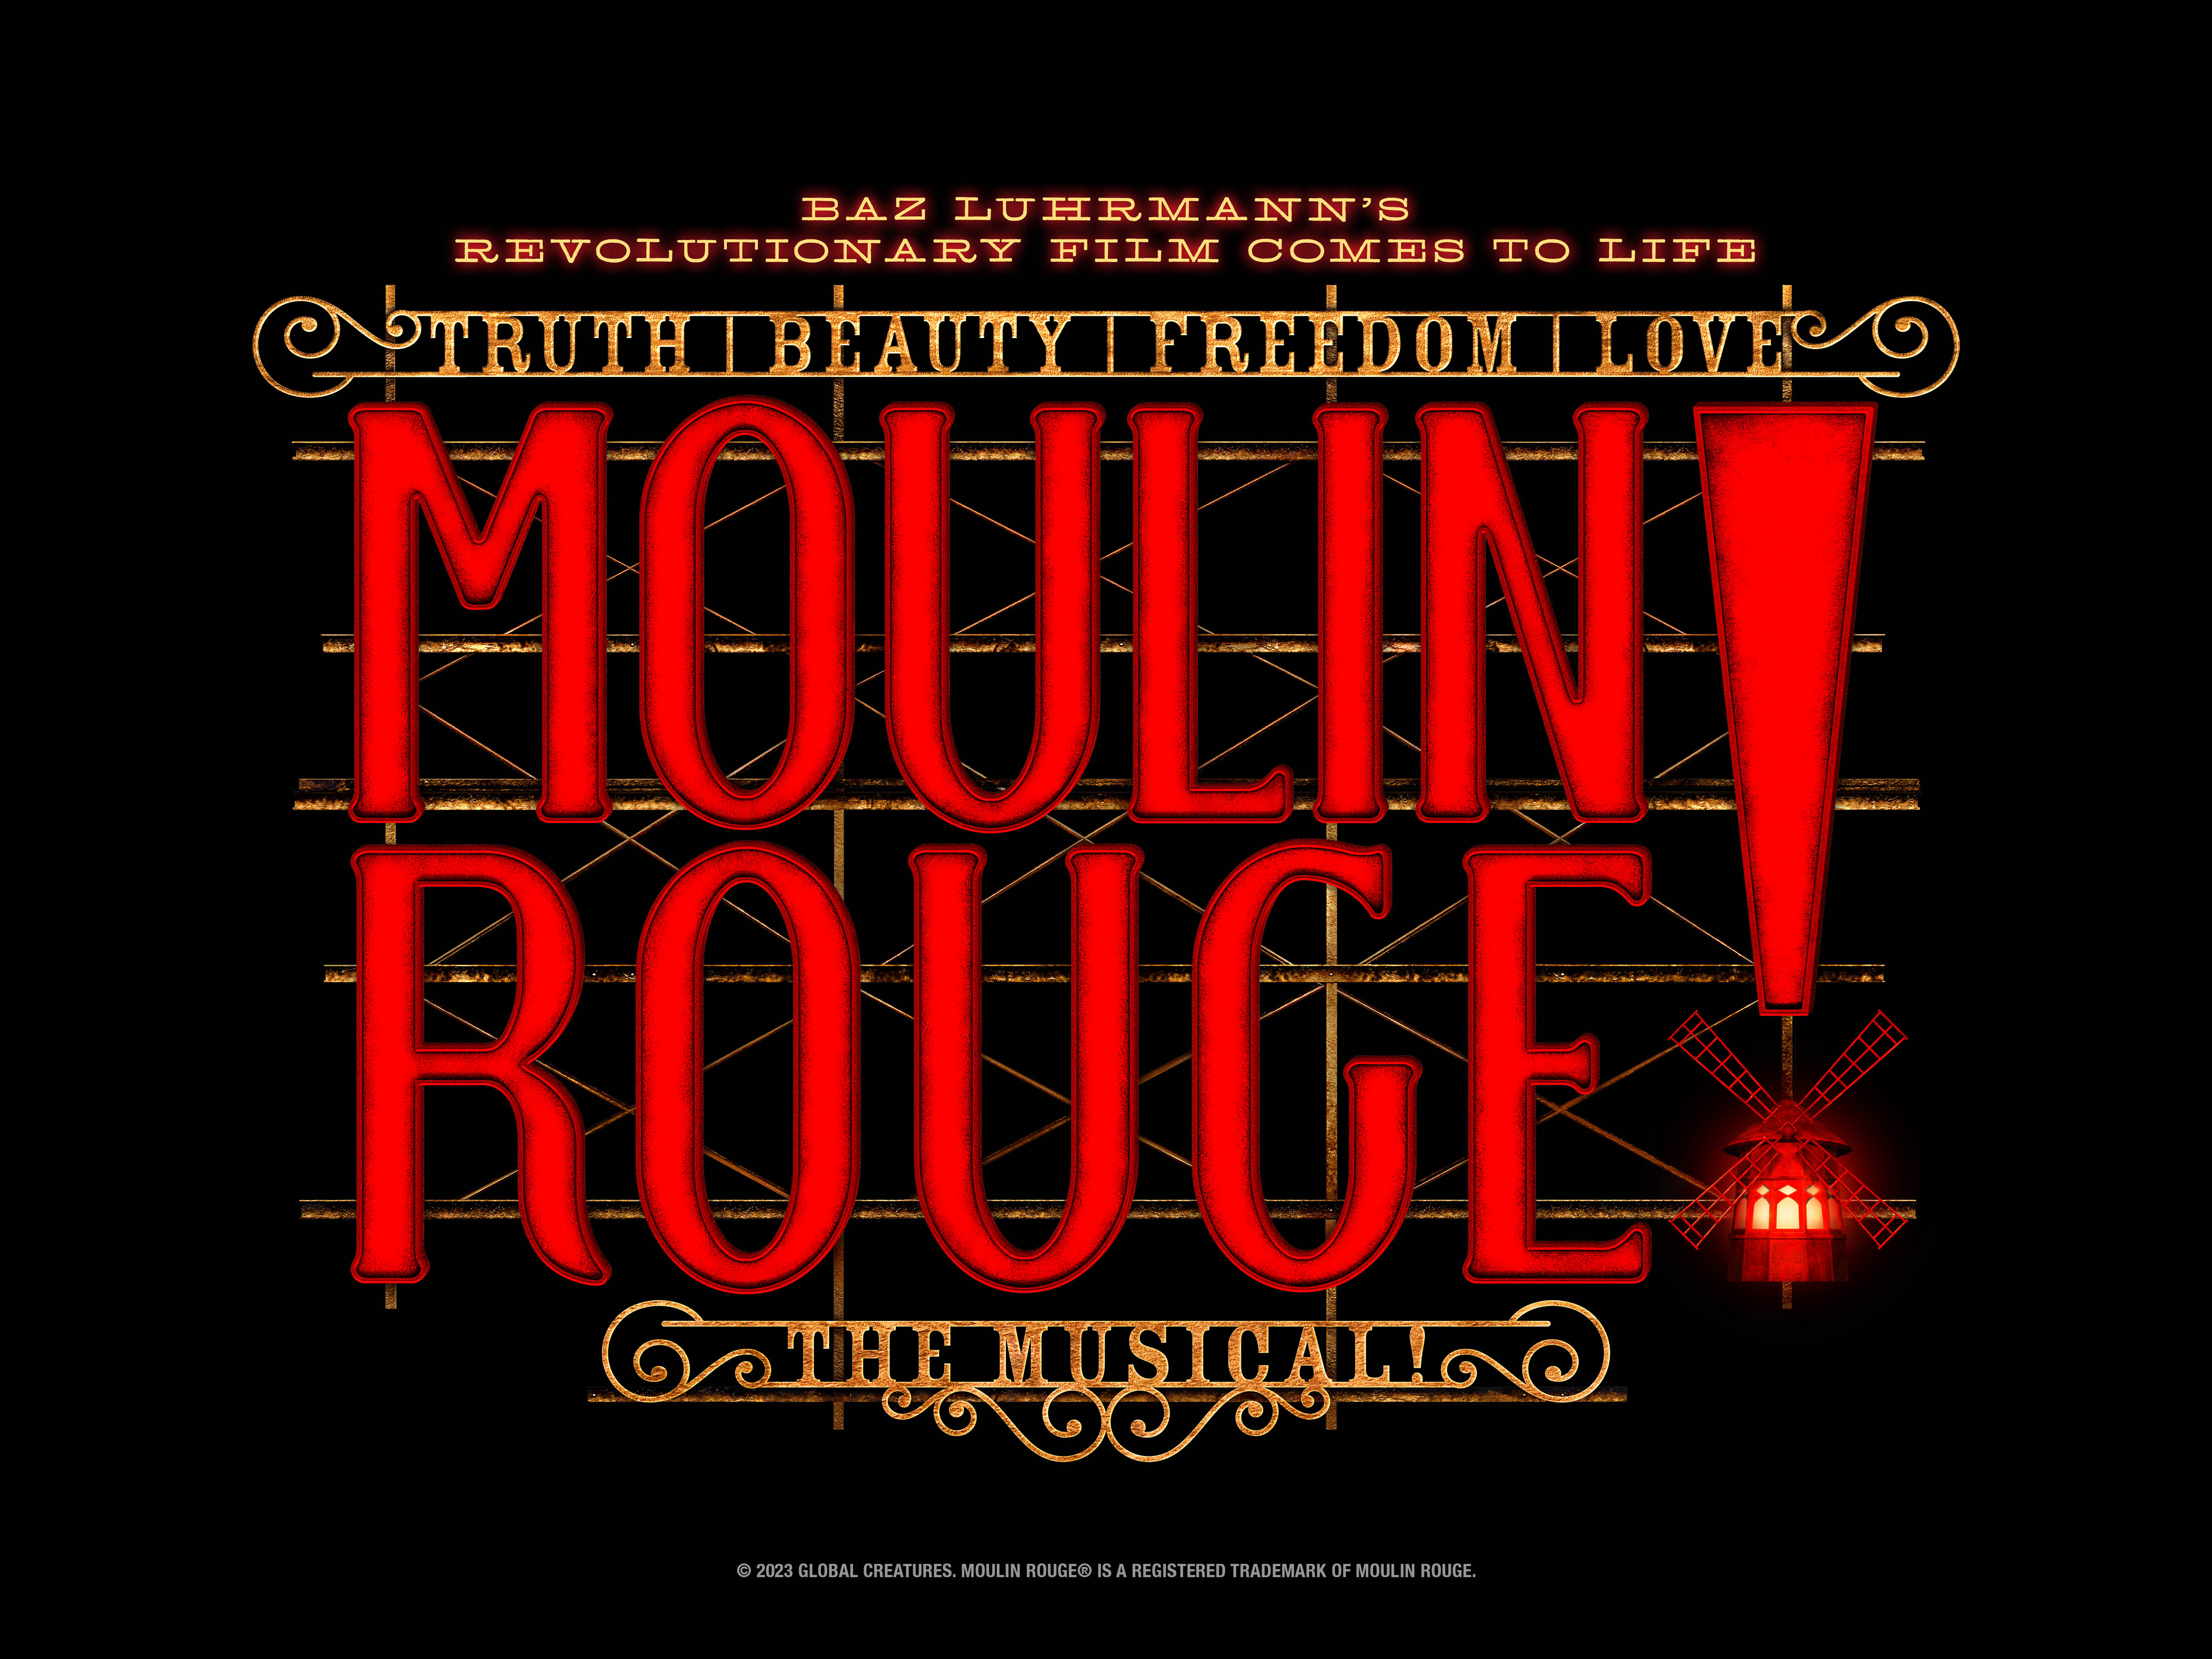 Moulin Rouge! The Musical Dr. Phillips Center for the Performing Arts